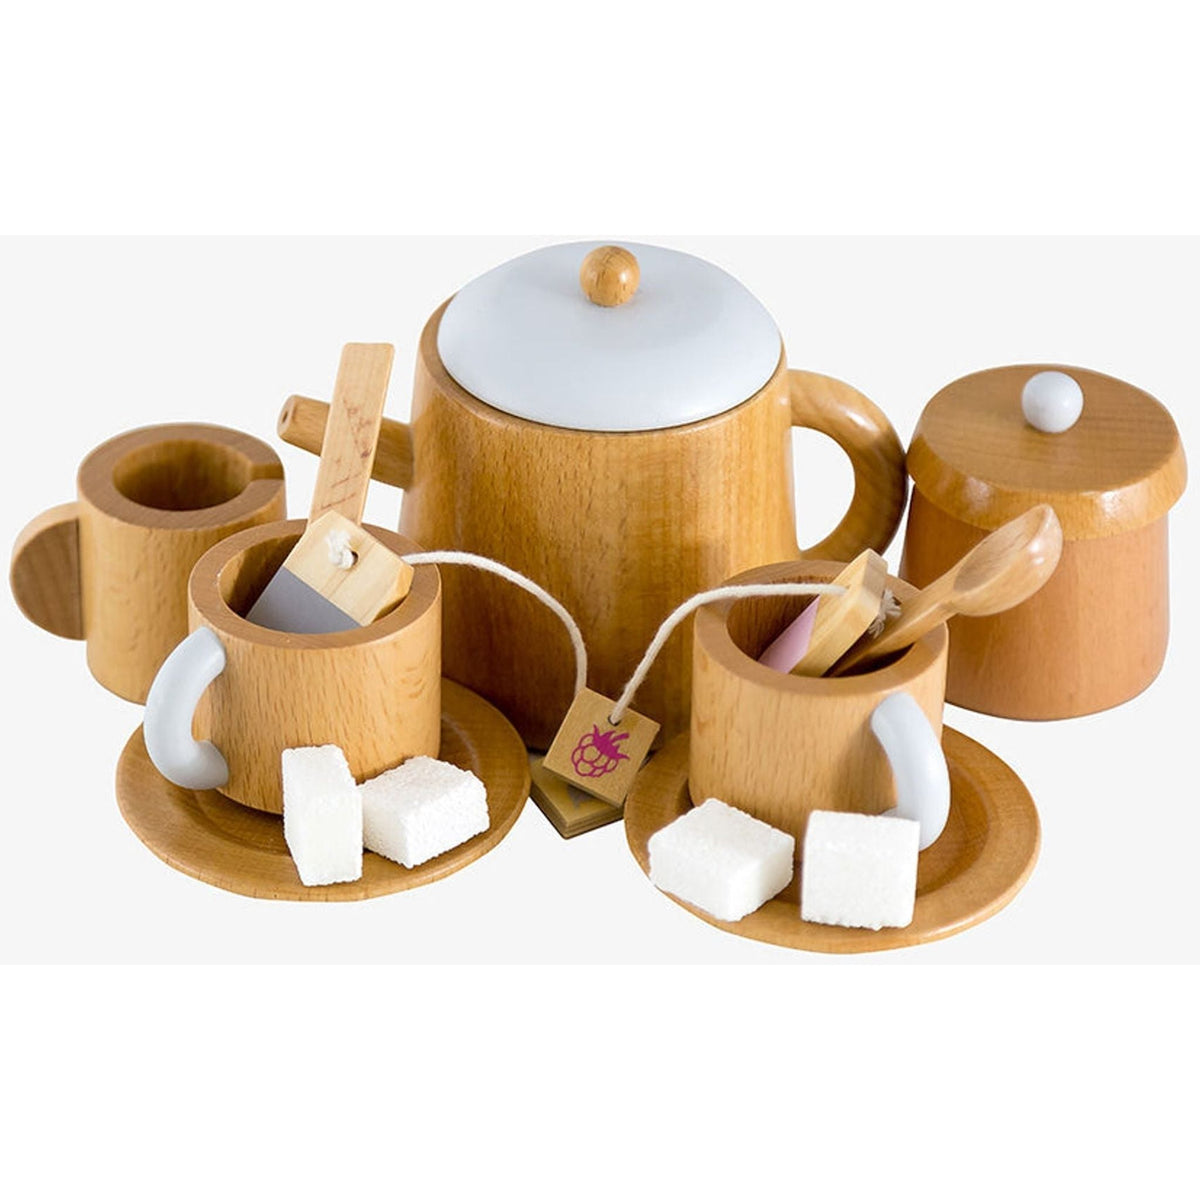 Iconic Toy - Teaset - Toybox Tales